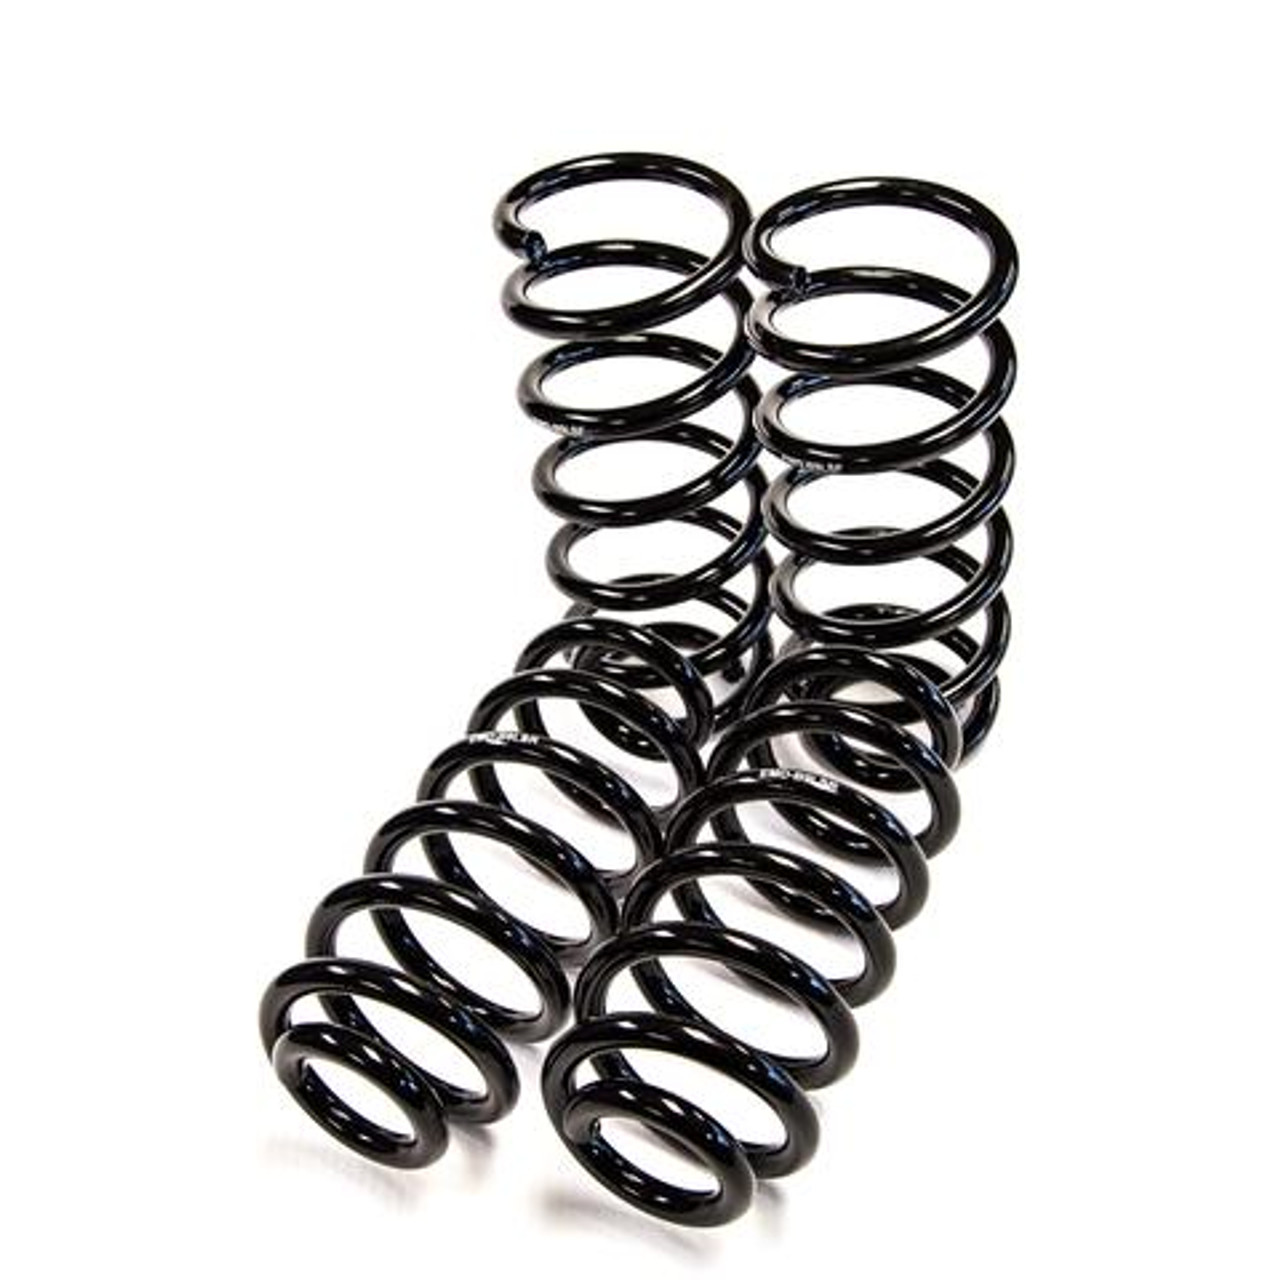 eMMOTION Lowering Spring Set for B9 A4/S4